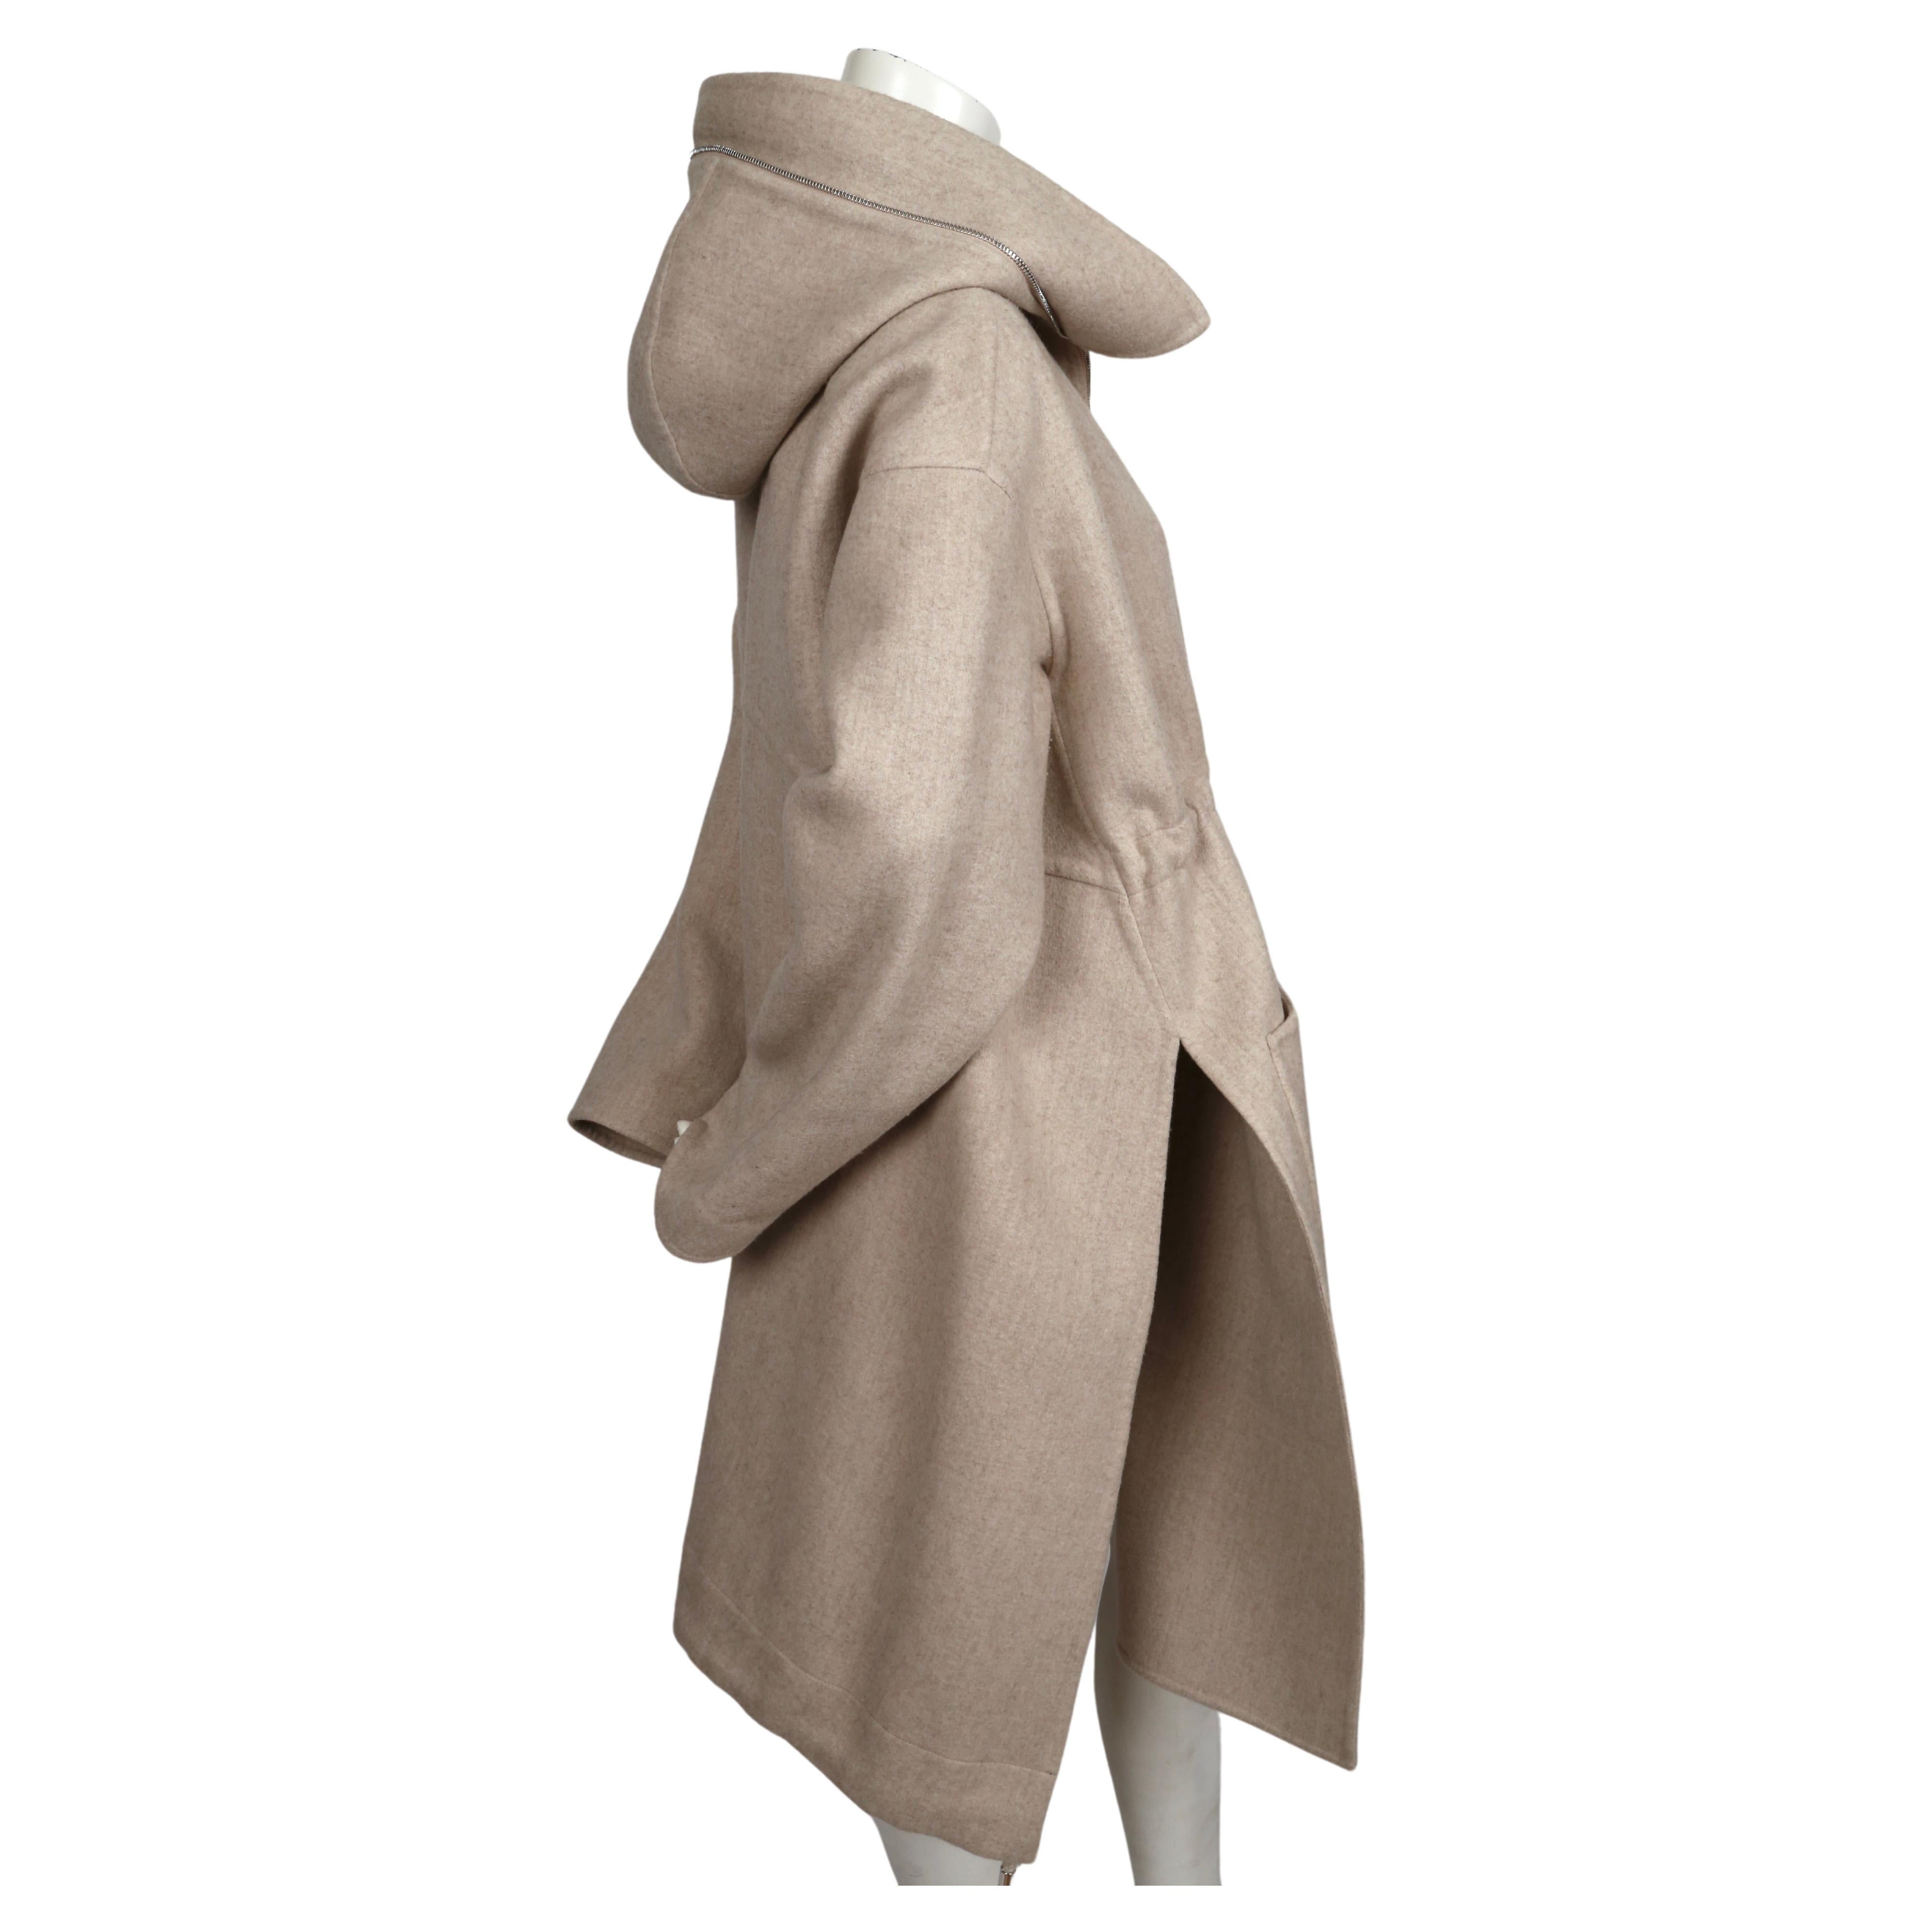 CELINE by PHOEBE PHILO oatmeal wool and cashmere coat with hood - resort 2016 For Sale 1